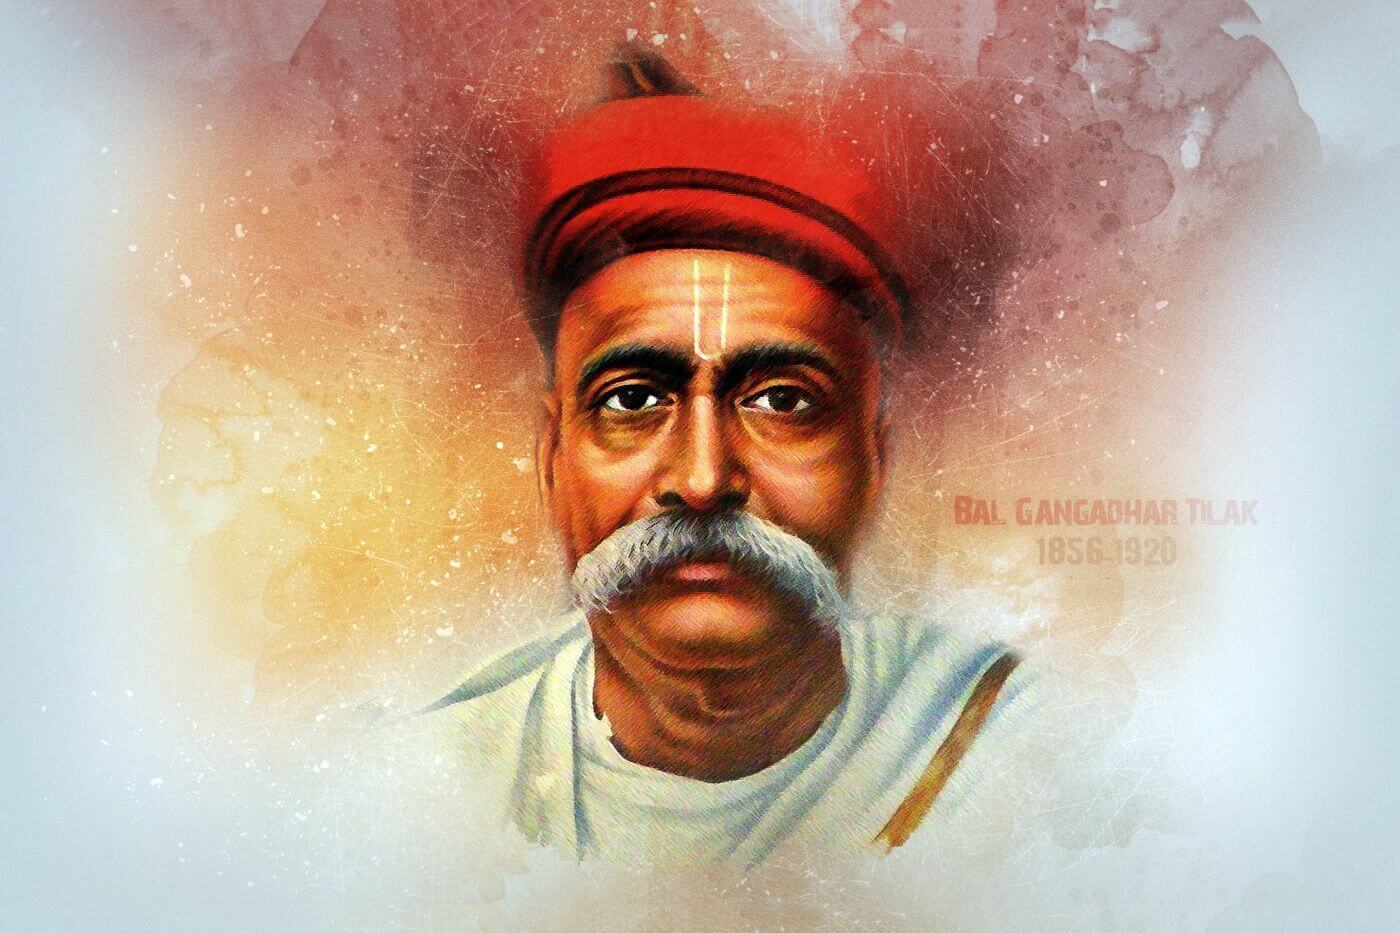 Lokmany Bal Gangadhar Tilak - Indian Freedom Fighter Patriot Painting Poster - Canvas Prints by Anurag Khamavant | Buy Posters, Frames, Canvas & Digital Art Prints | Small, Compact, Medium and Large Variants